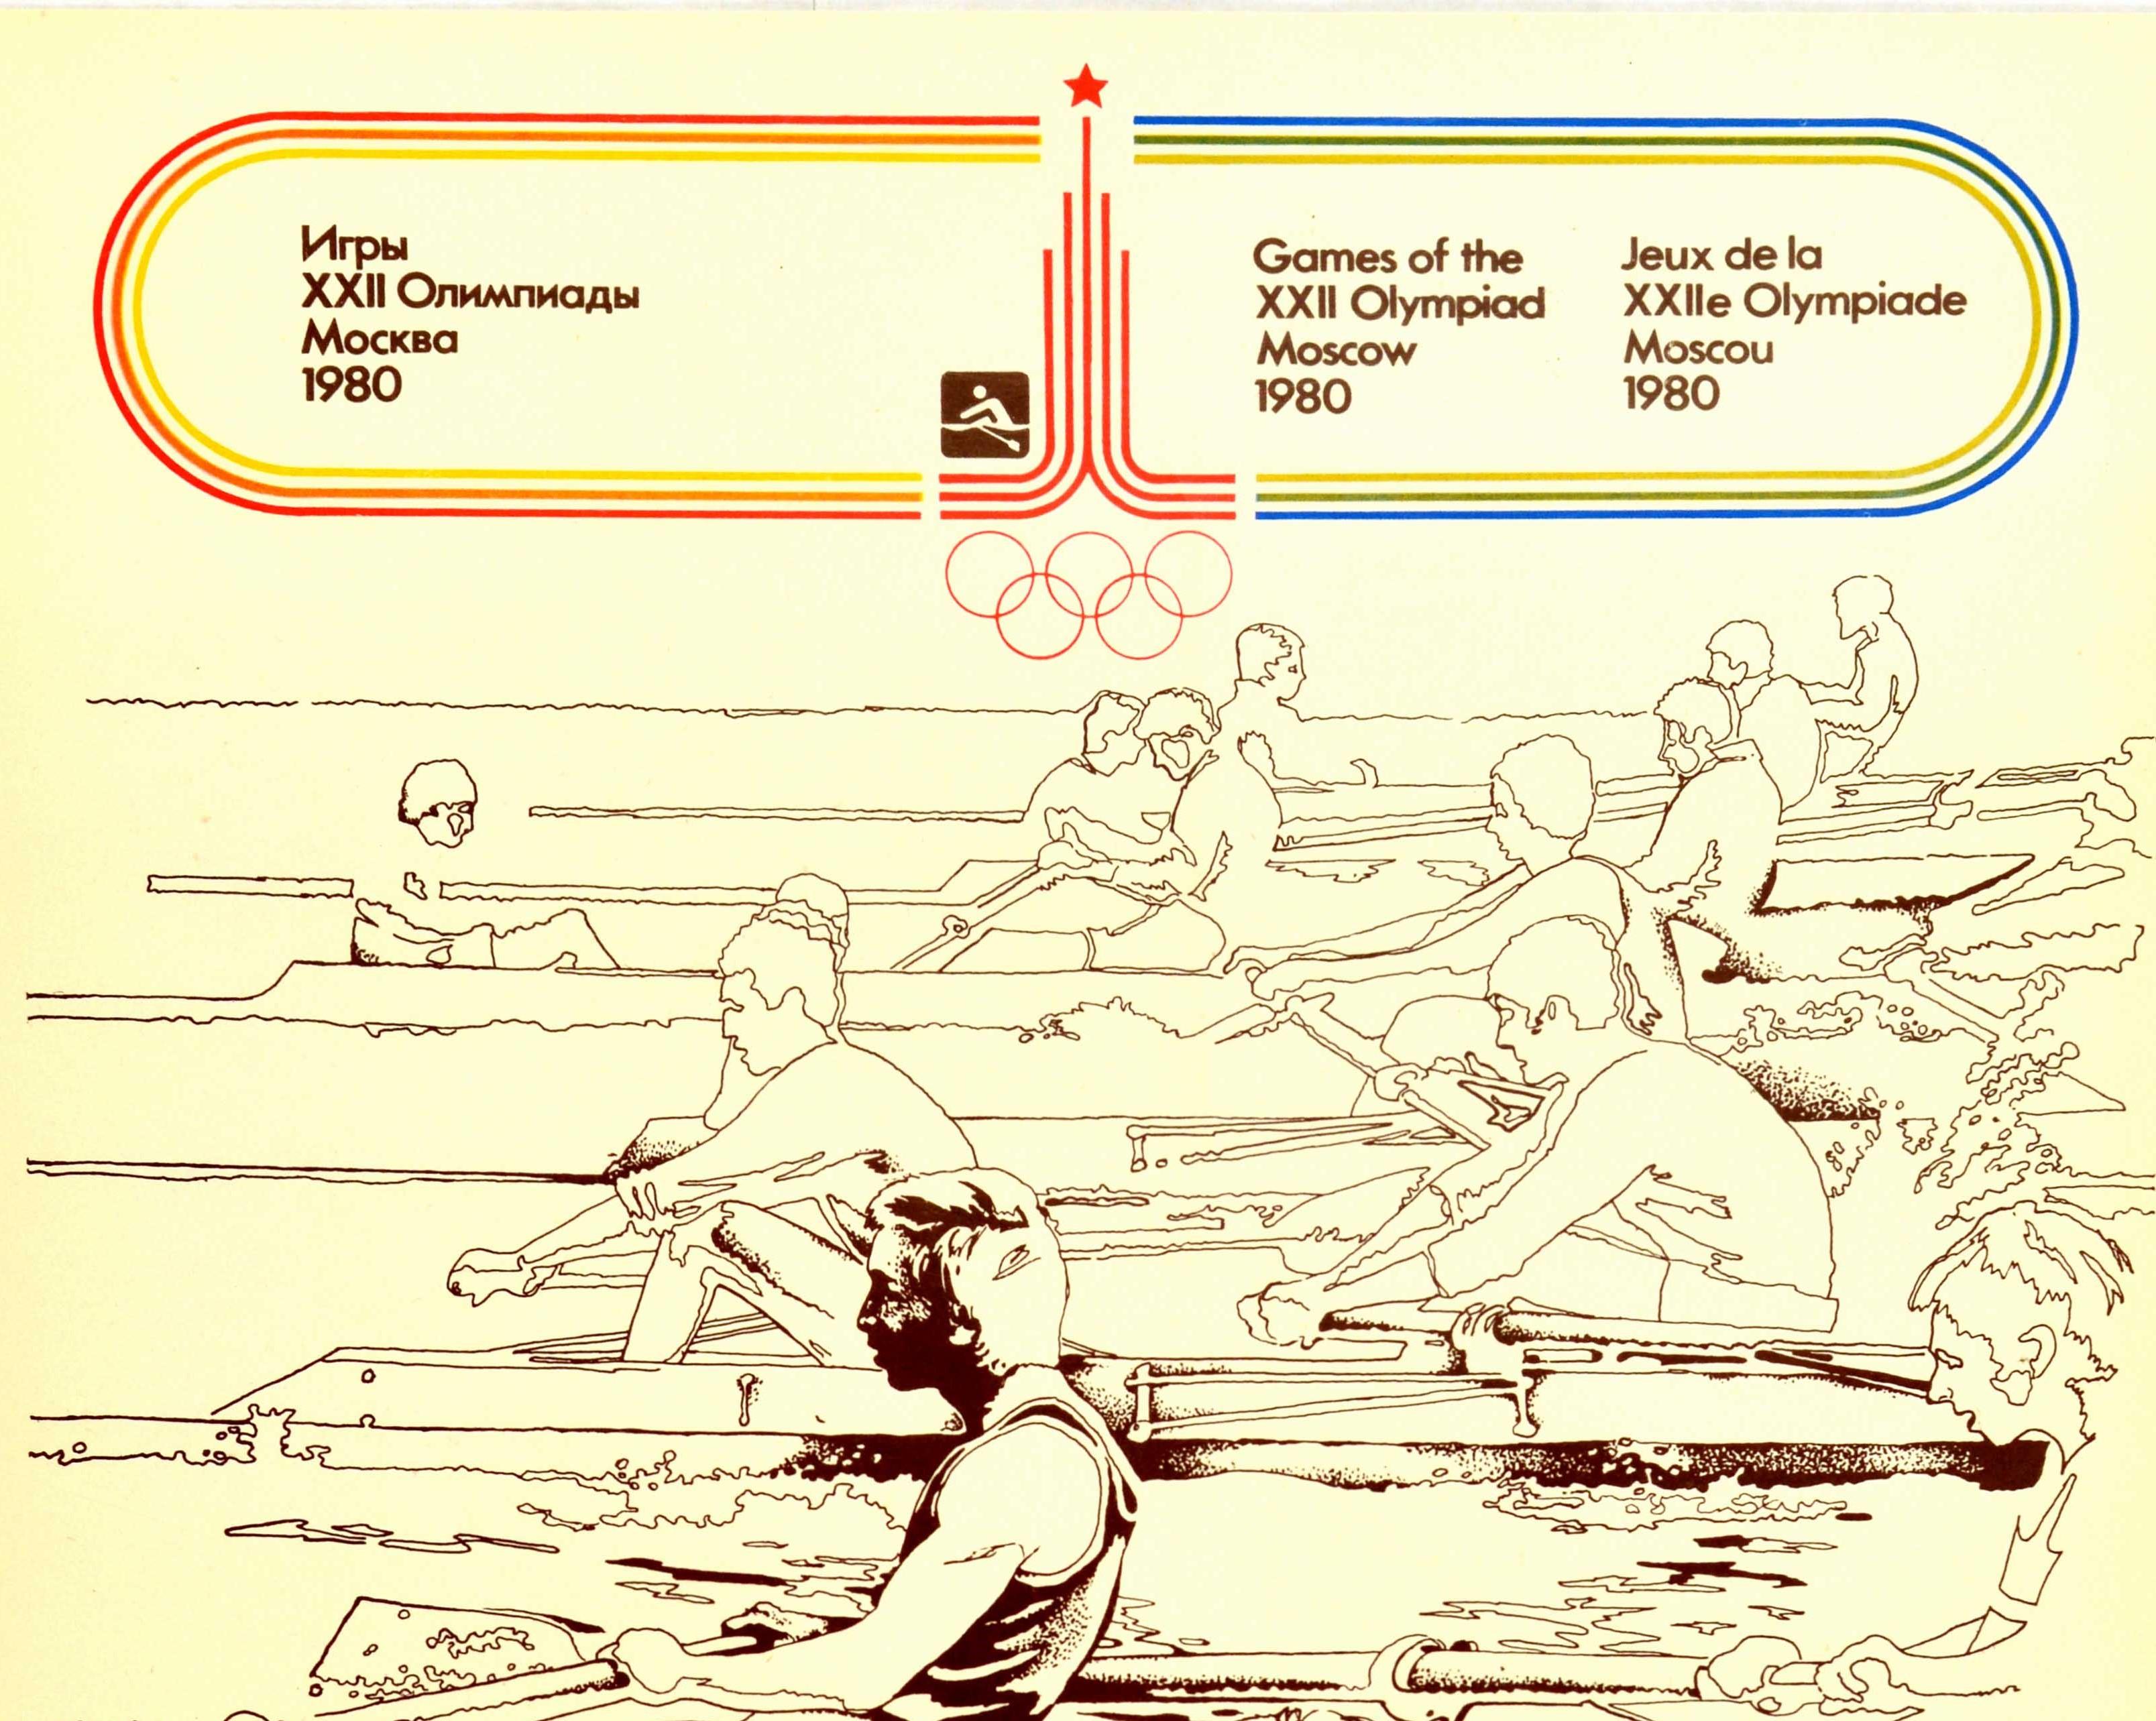 Original vintage sport poster for the 1980 Olympic Games held in Moscow Russia featuring a dynamic design of rowers in lanes competing against each other in their boats with the rowing event symbol and Moscow Olympic logo and rings in red above, the